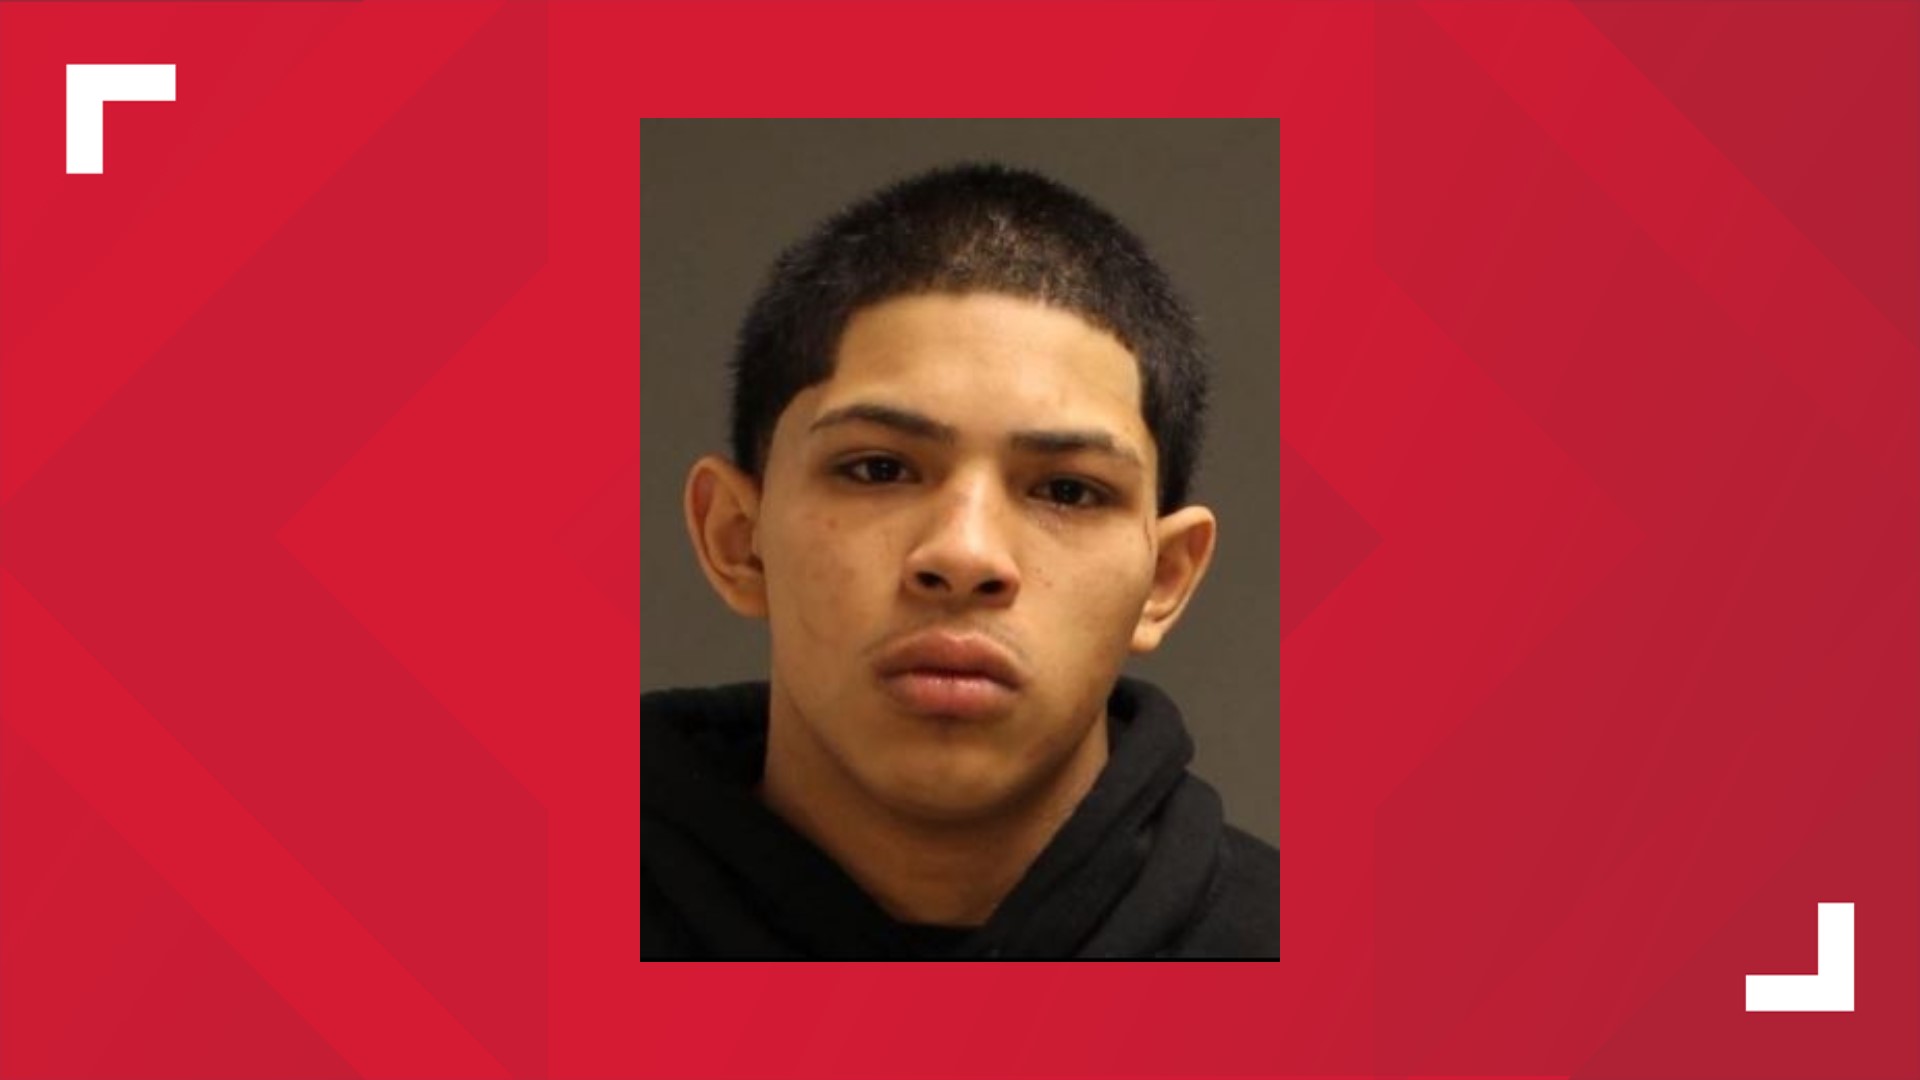 Jeremiahs Josiah-Alberto Sanchez is being charged as an adult in the incident, according to Lancaster County District Attorney Heather Adams.